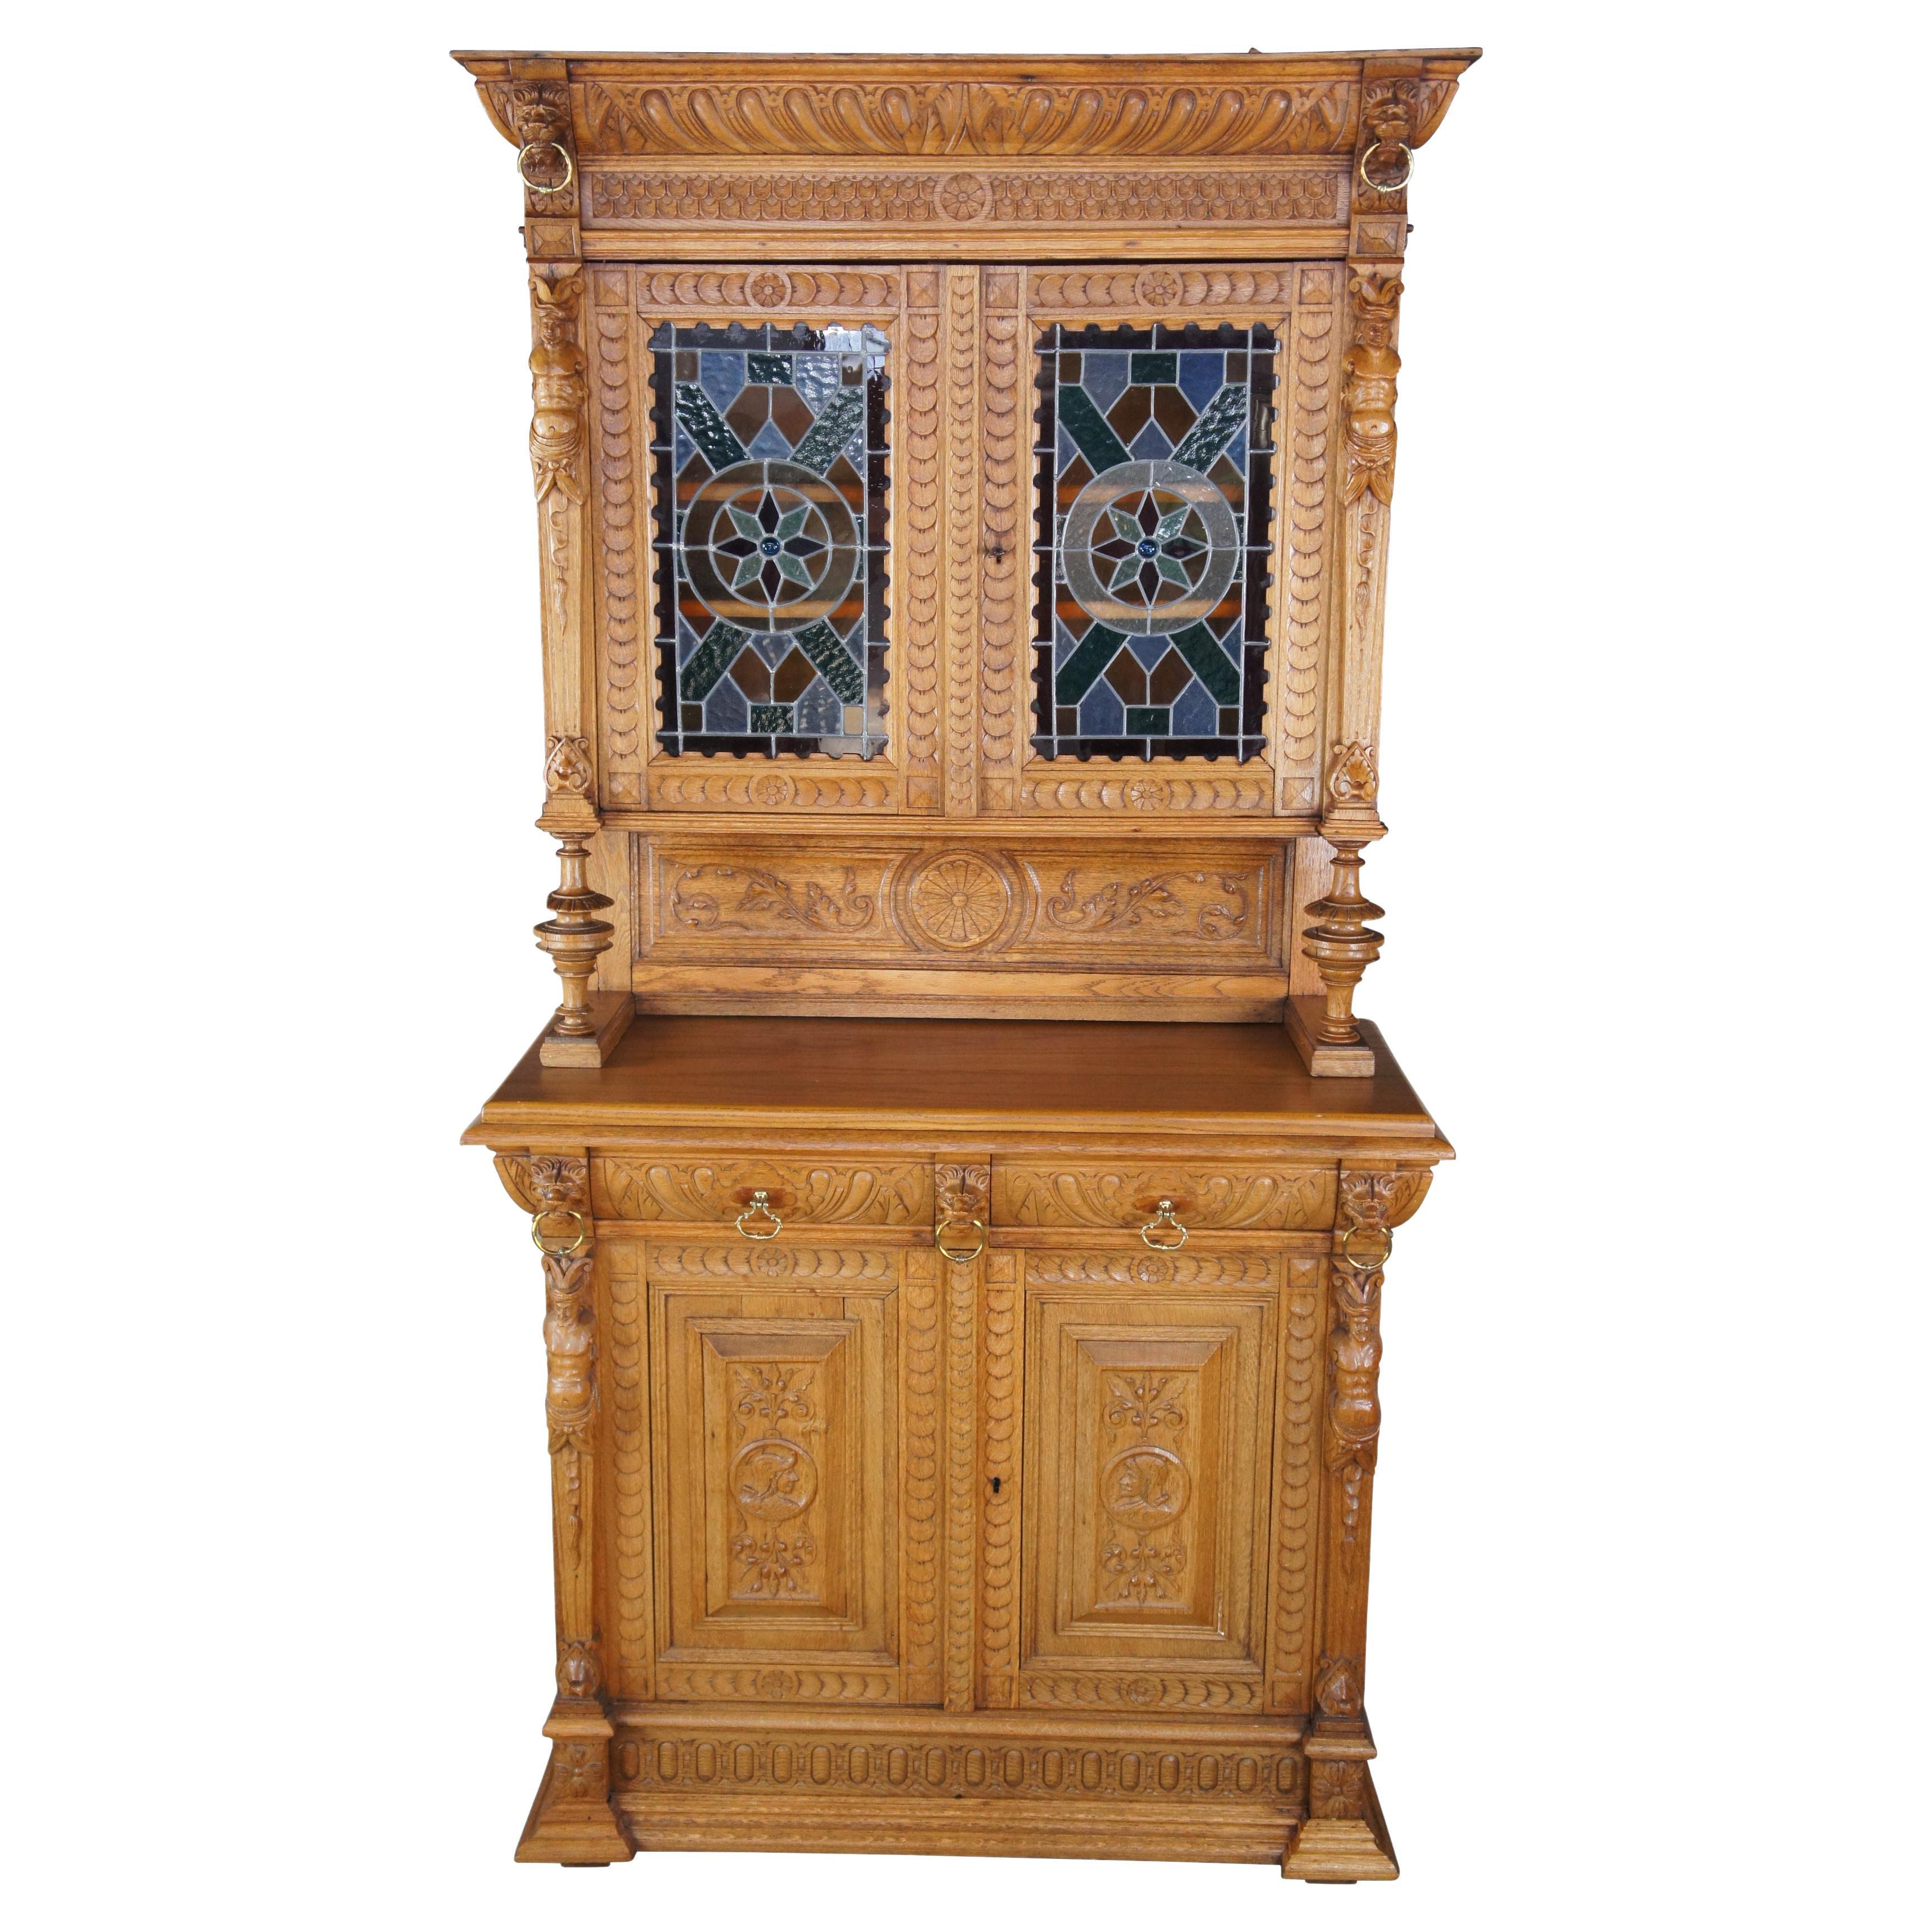 Monumental Antique Mechelen Renaissance Revival China Hutch, circa 1890s.  Made from oak with elaborate figural and floral carved details.   Features vibrant original stained glass windows.  The buffet or server section of the cabinet has a large